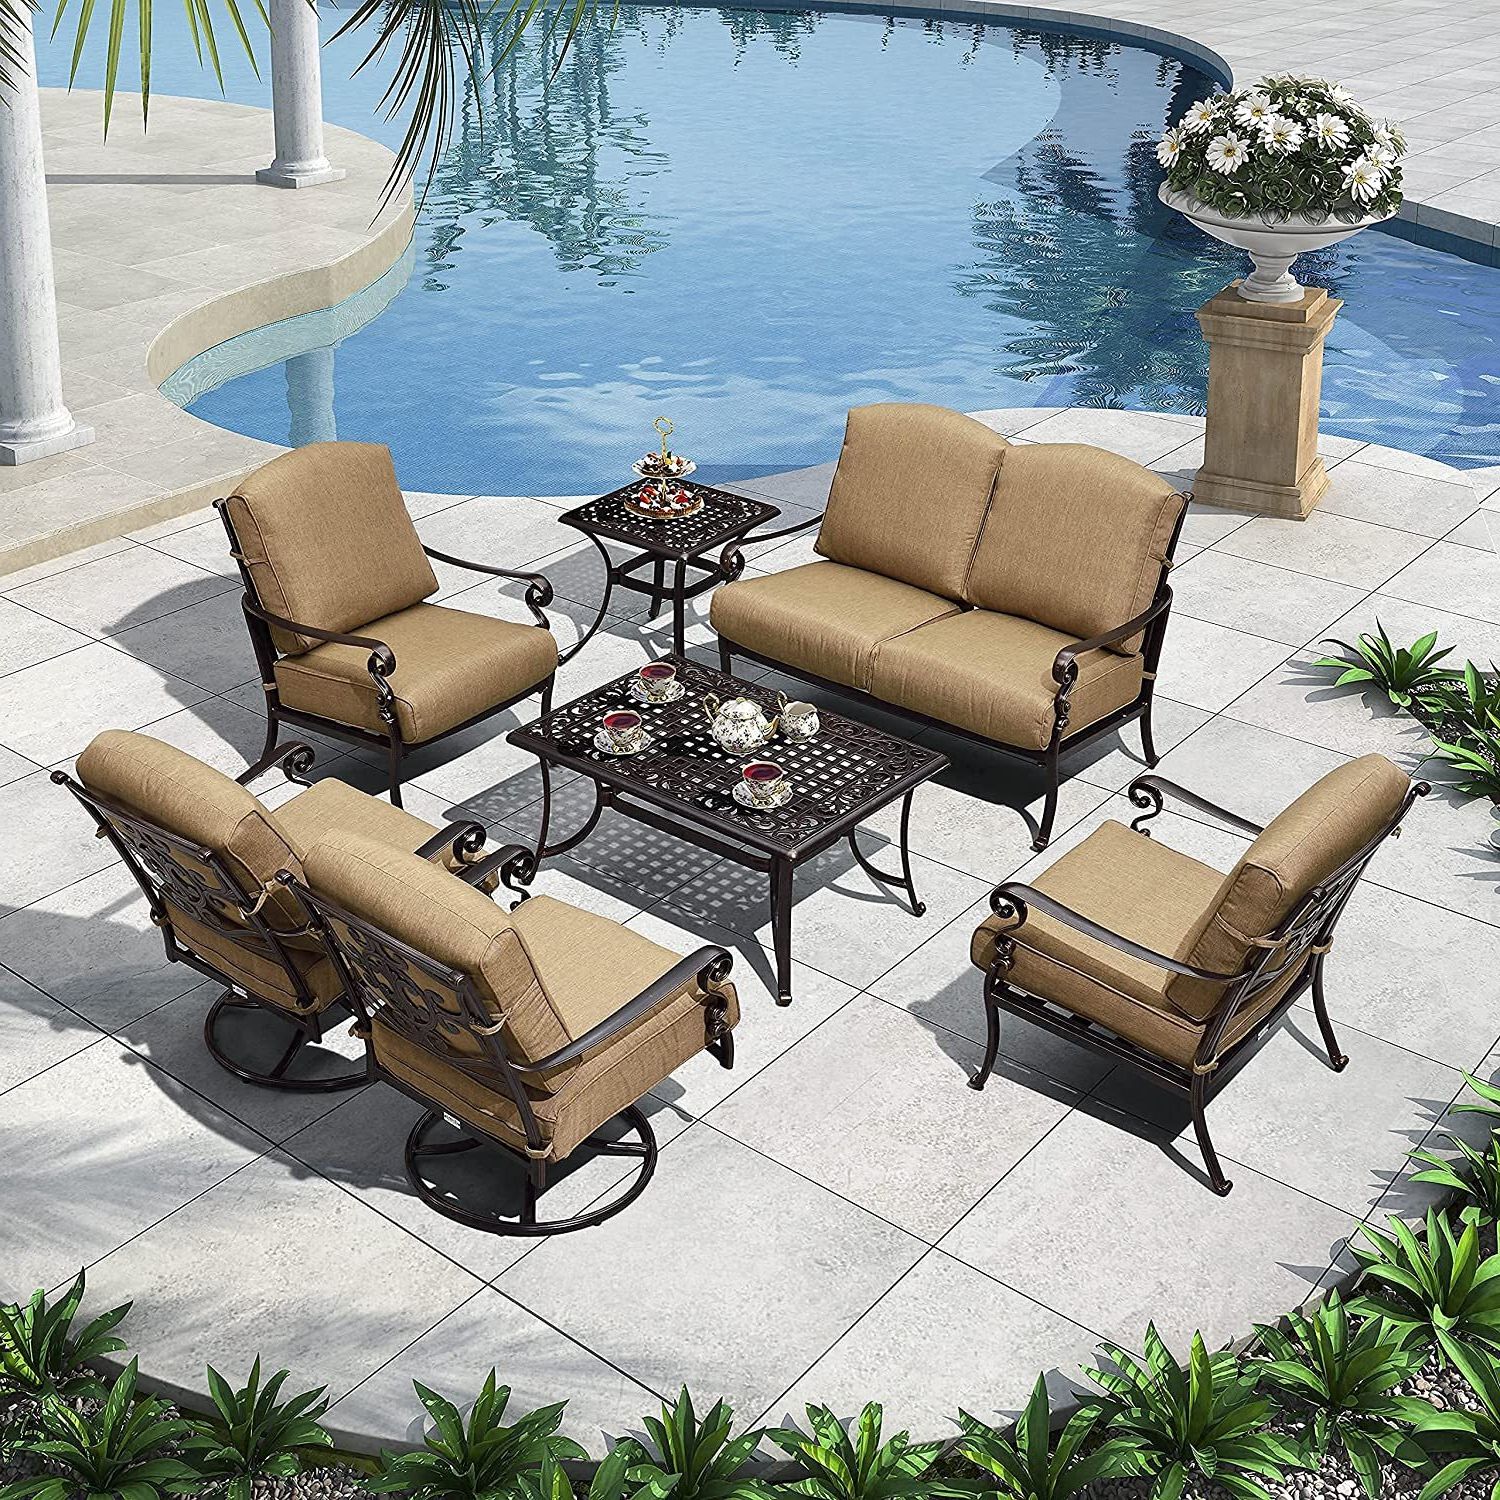 Side Table Iron Frame Patio Furniture Set Throughout Widely Used Cast Iron Patio Furniture Sets – Ideas On Foter (View 13 of 15)